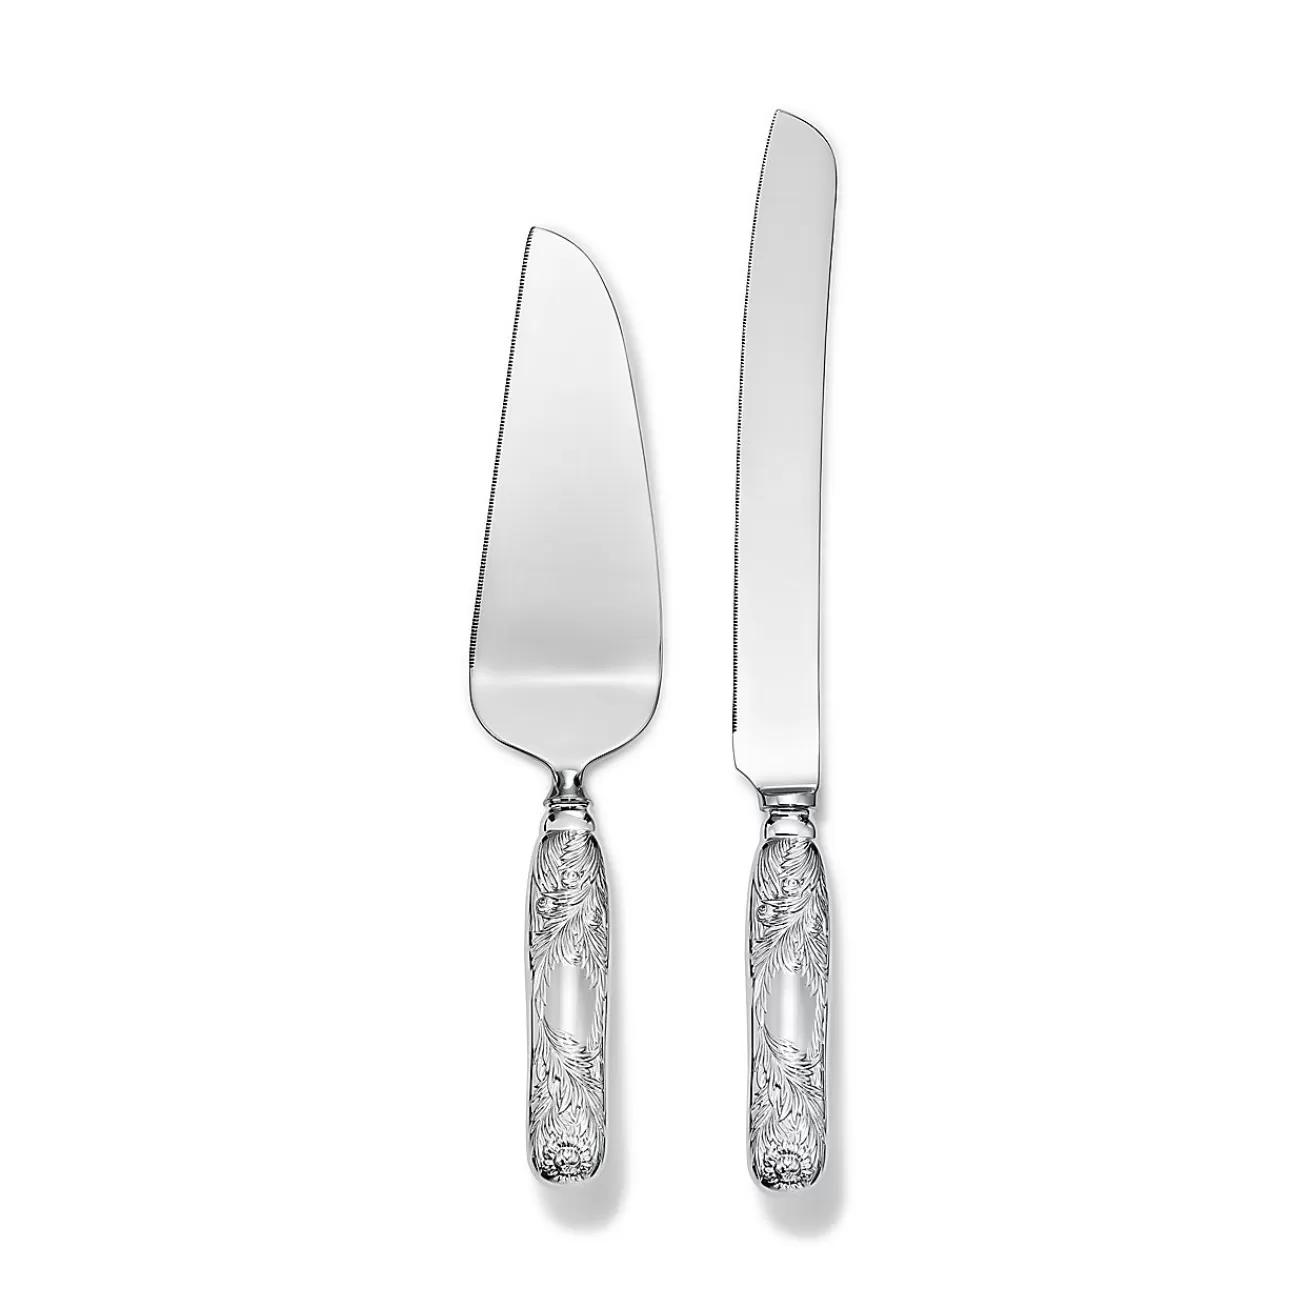 Tiffany & Co. Chrysanthemum cake knife and server in sterling silver. | ^ Tableware | Flatware & Trays